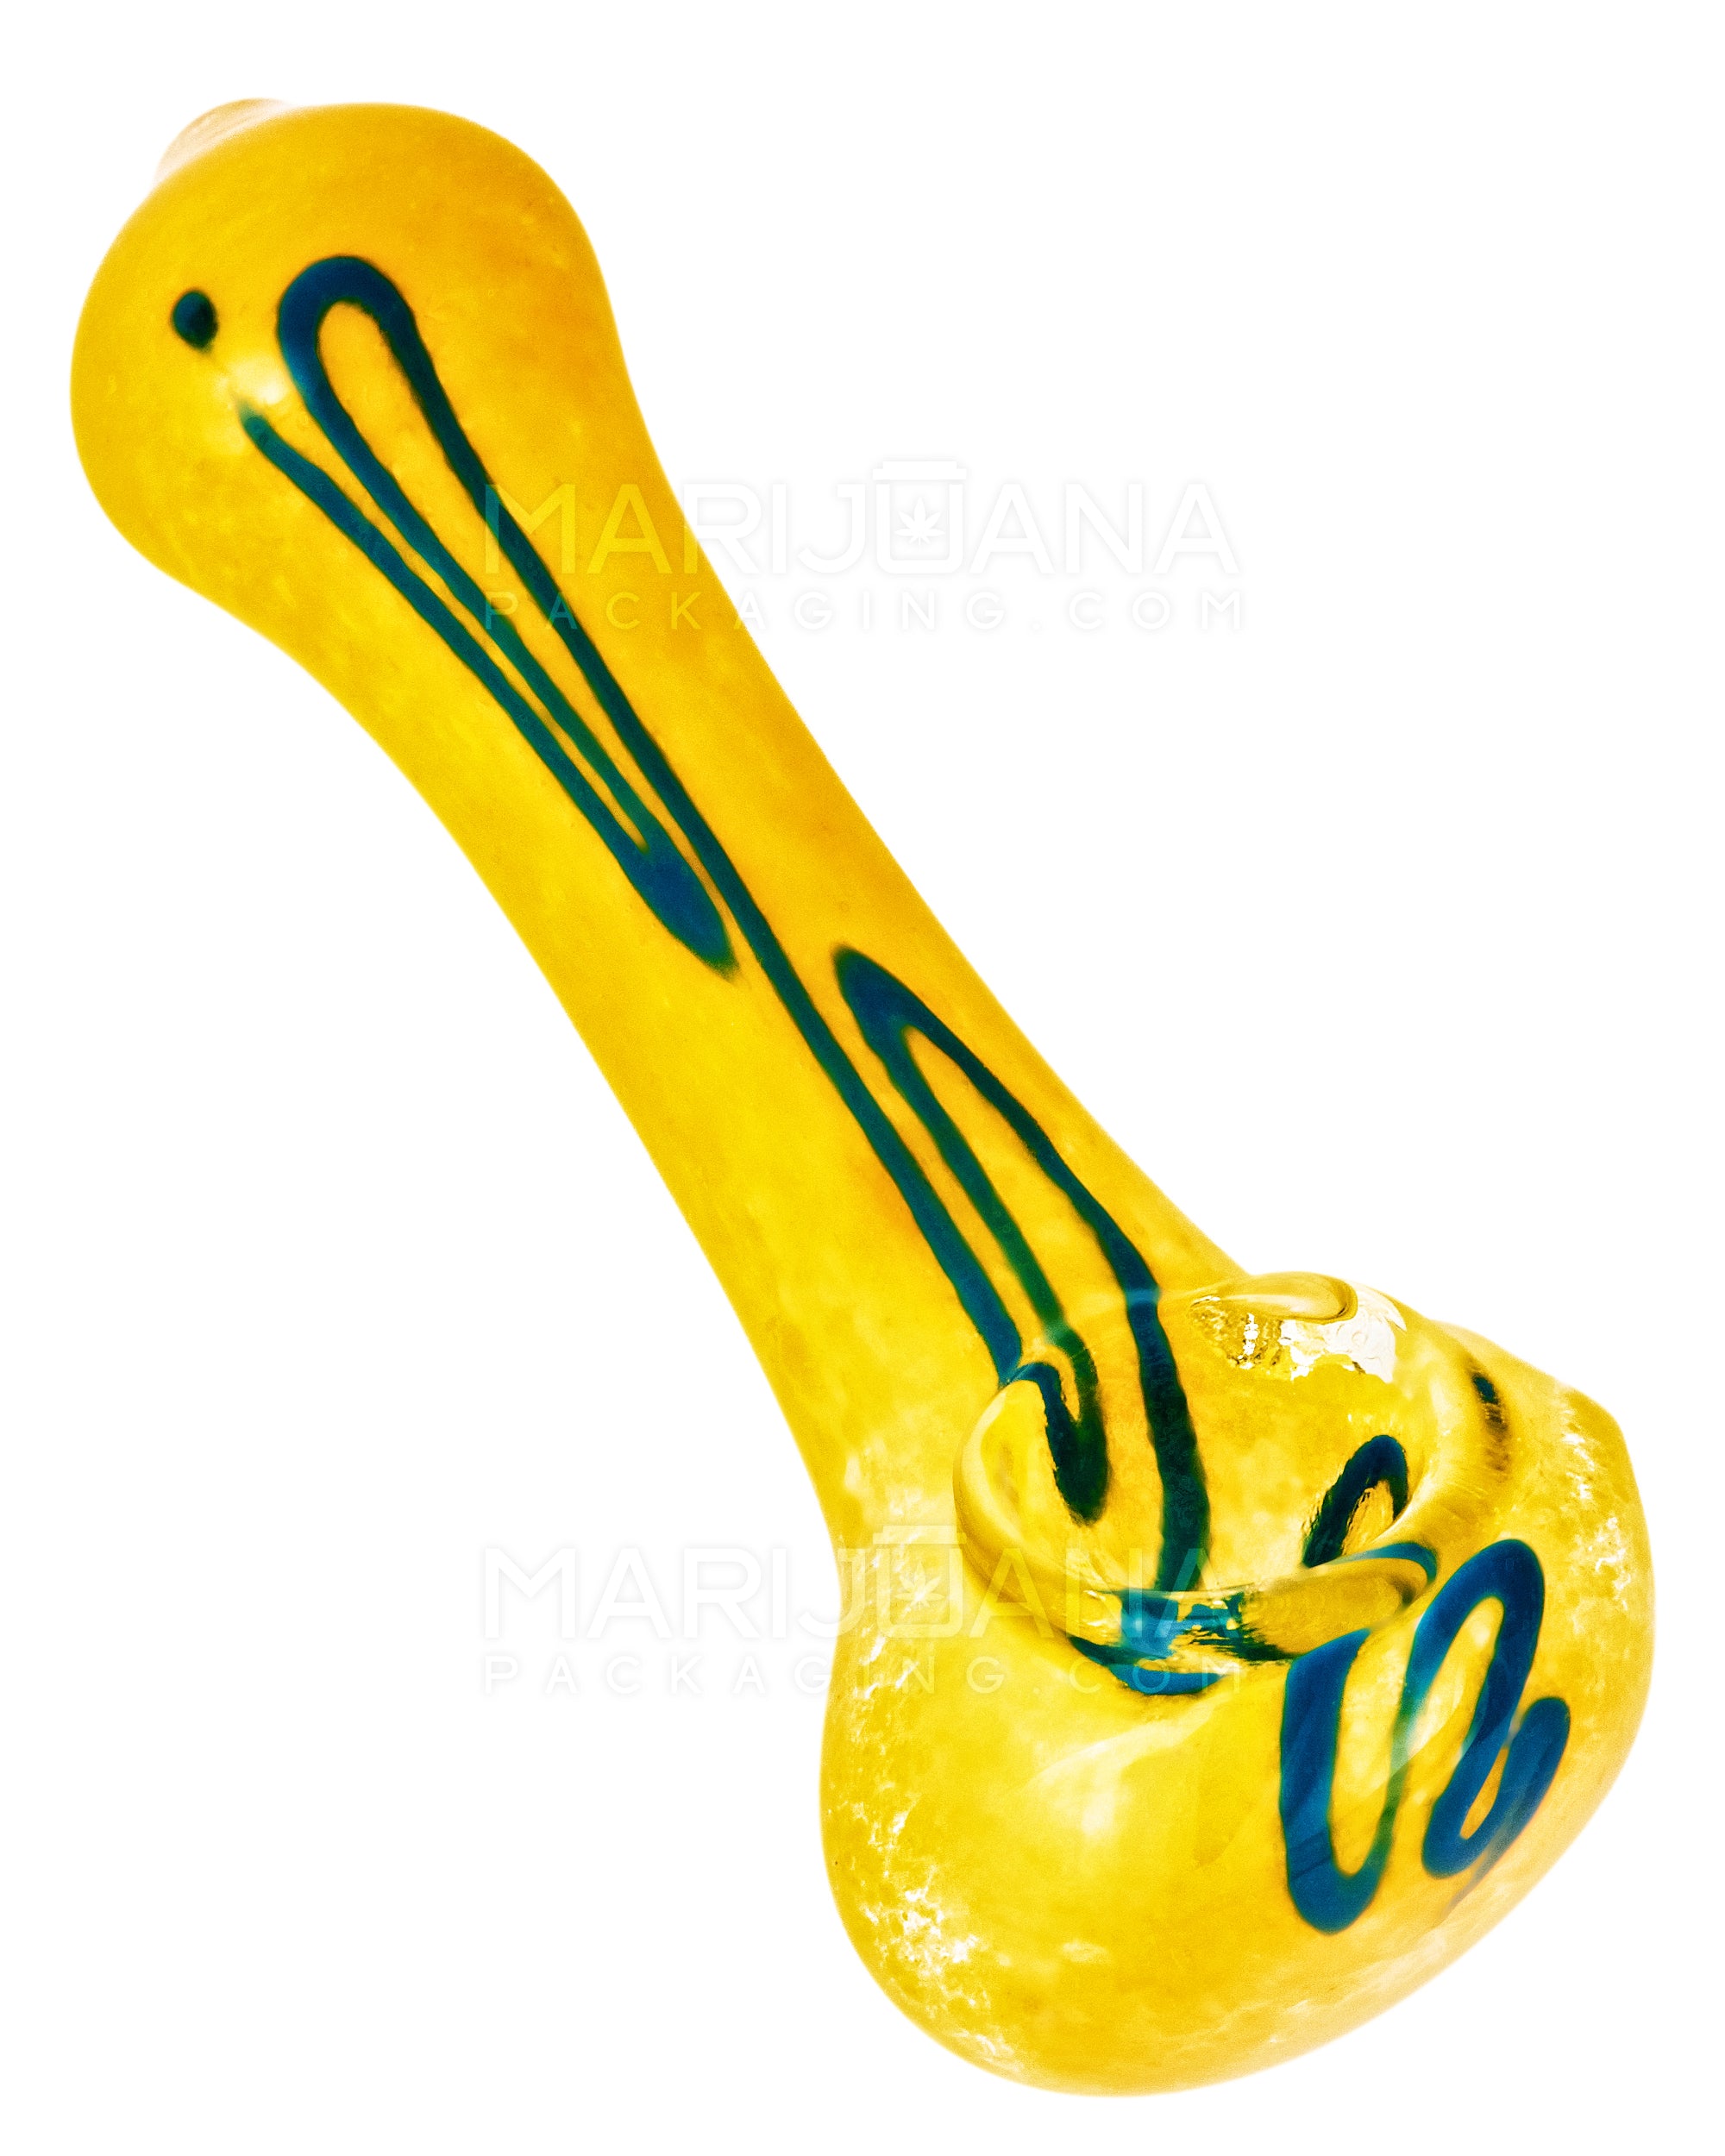 Frit & Swirl Spoon Hand Pipe | 4in Long - Glass - Assorted - 1